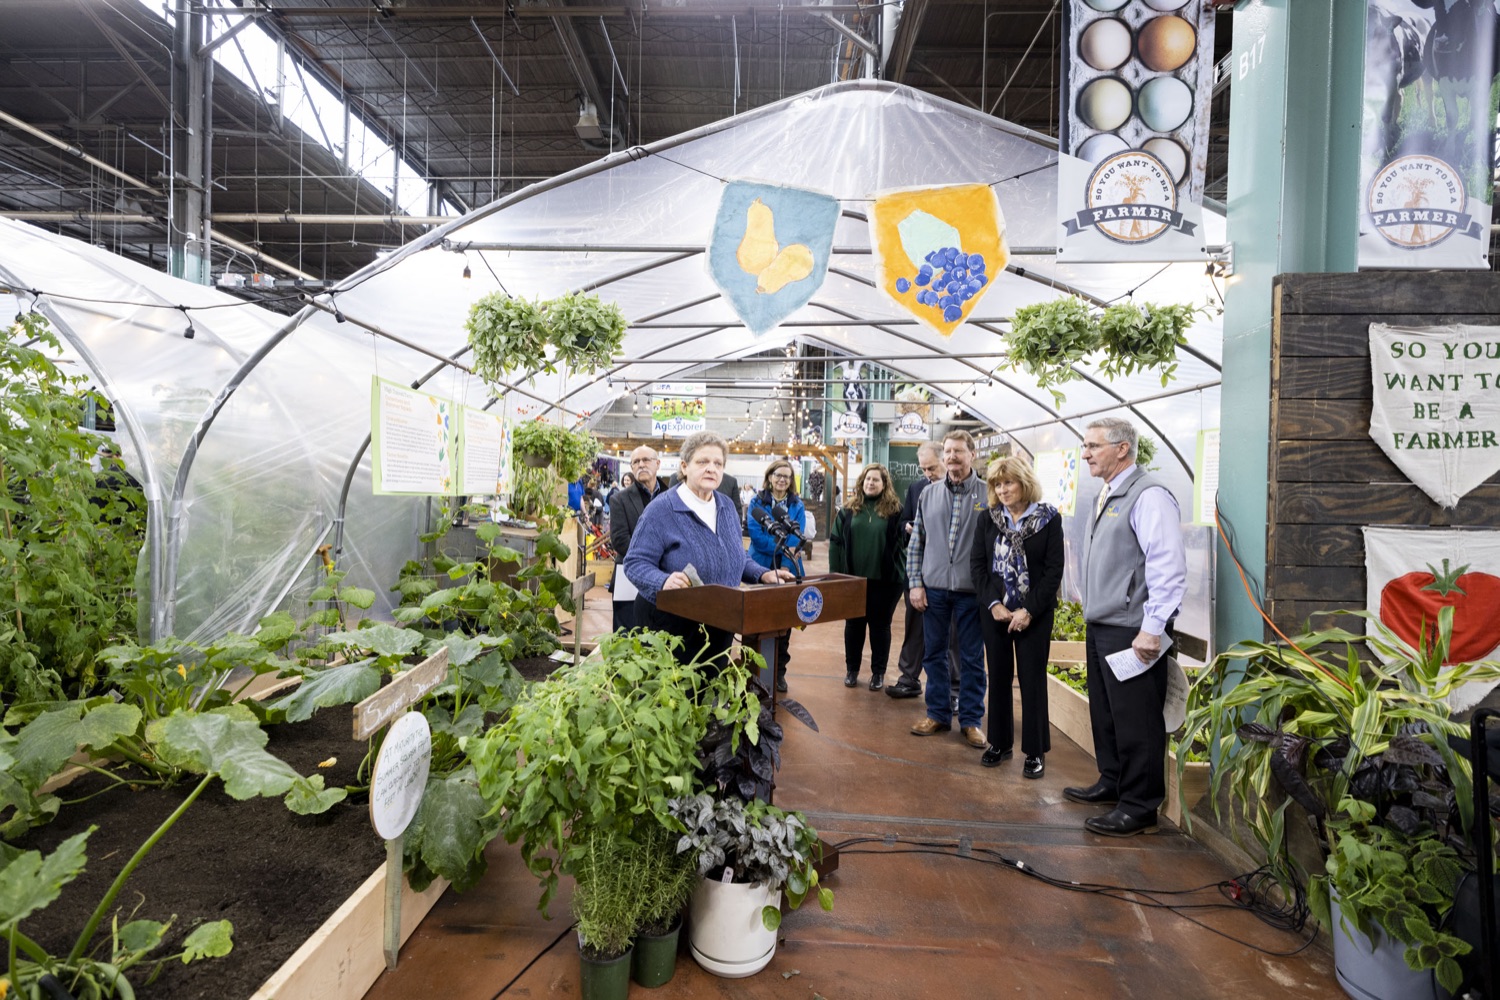 Deputy Secretary of Agriculture Cheryl Cook celebrates growth and innovation in PA organic productions and announces plans to continue that growth, in Harrisburg, PA on January 13, 2023.<br><a href="https://filesource.amperwave.net/commonwealthofpa/photo/22478_ag_organic_capstone_06.jpg" target="_blank">⇣ Download Photo</a>